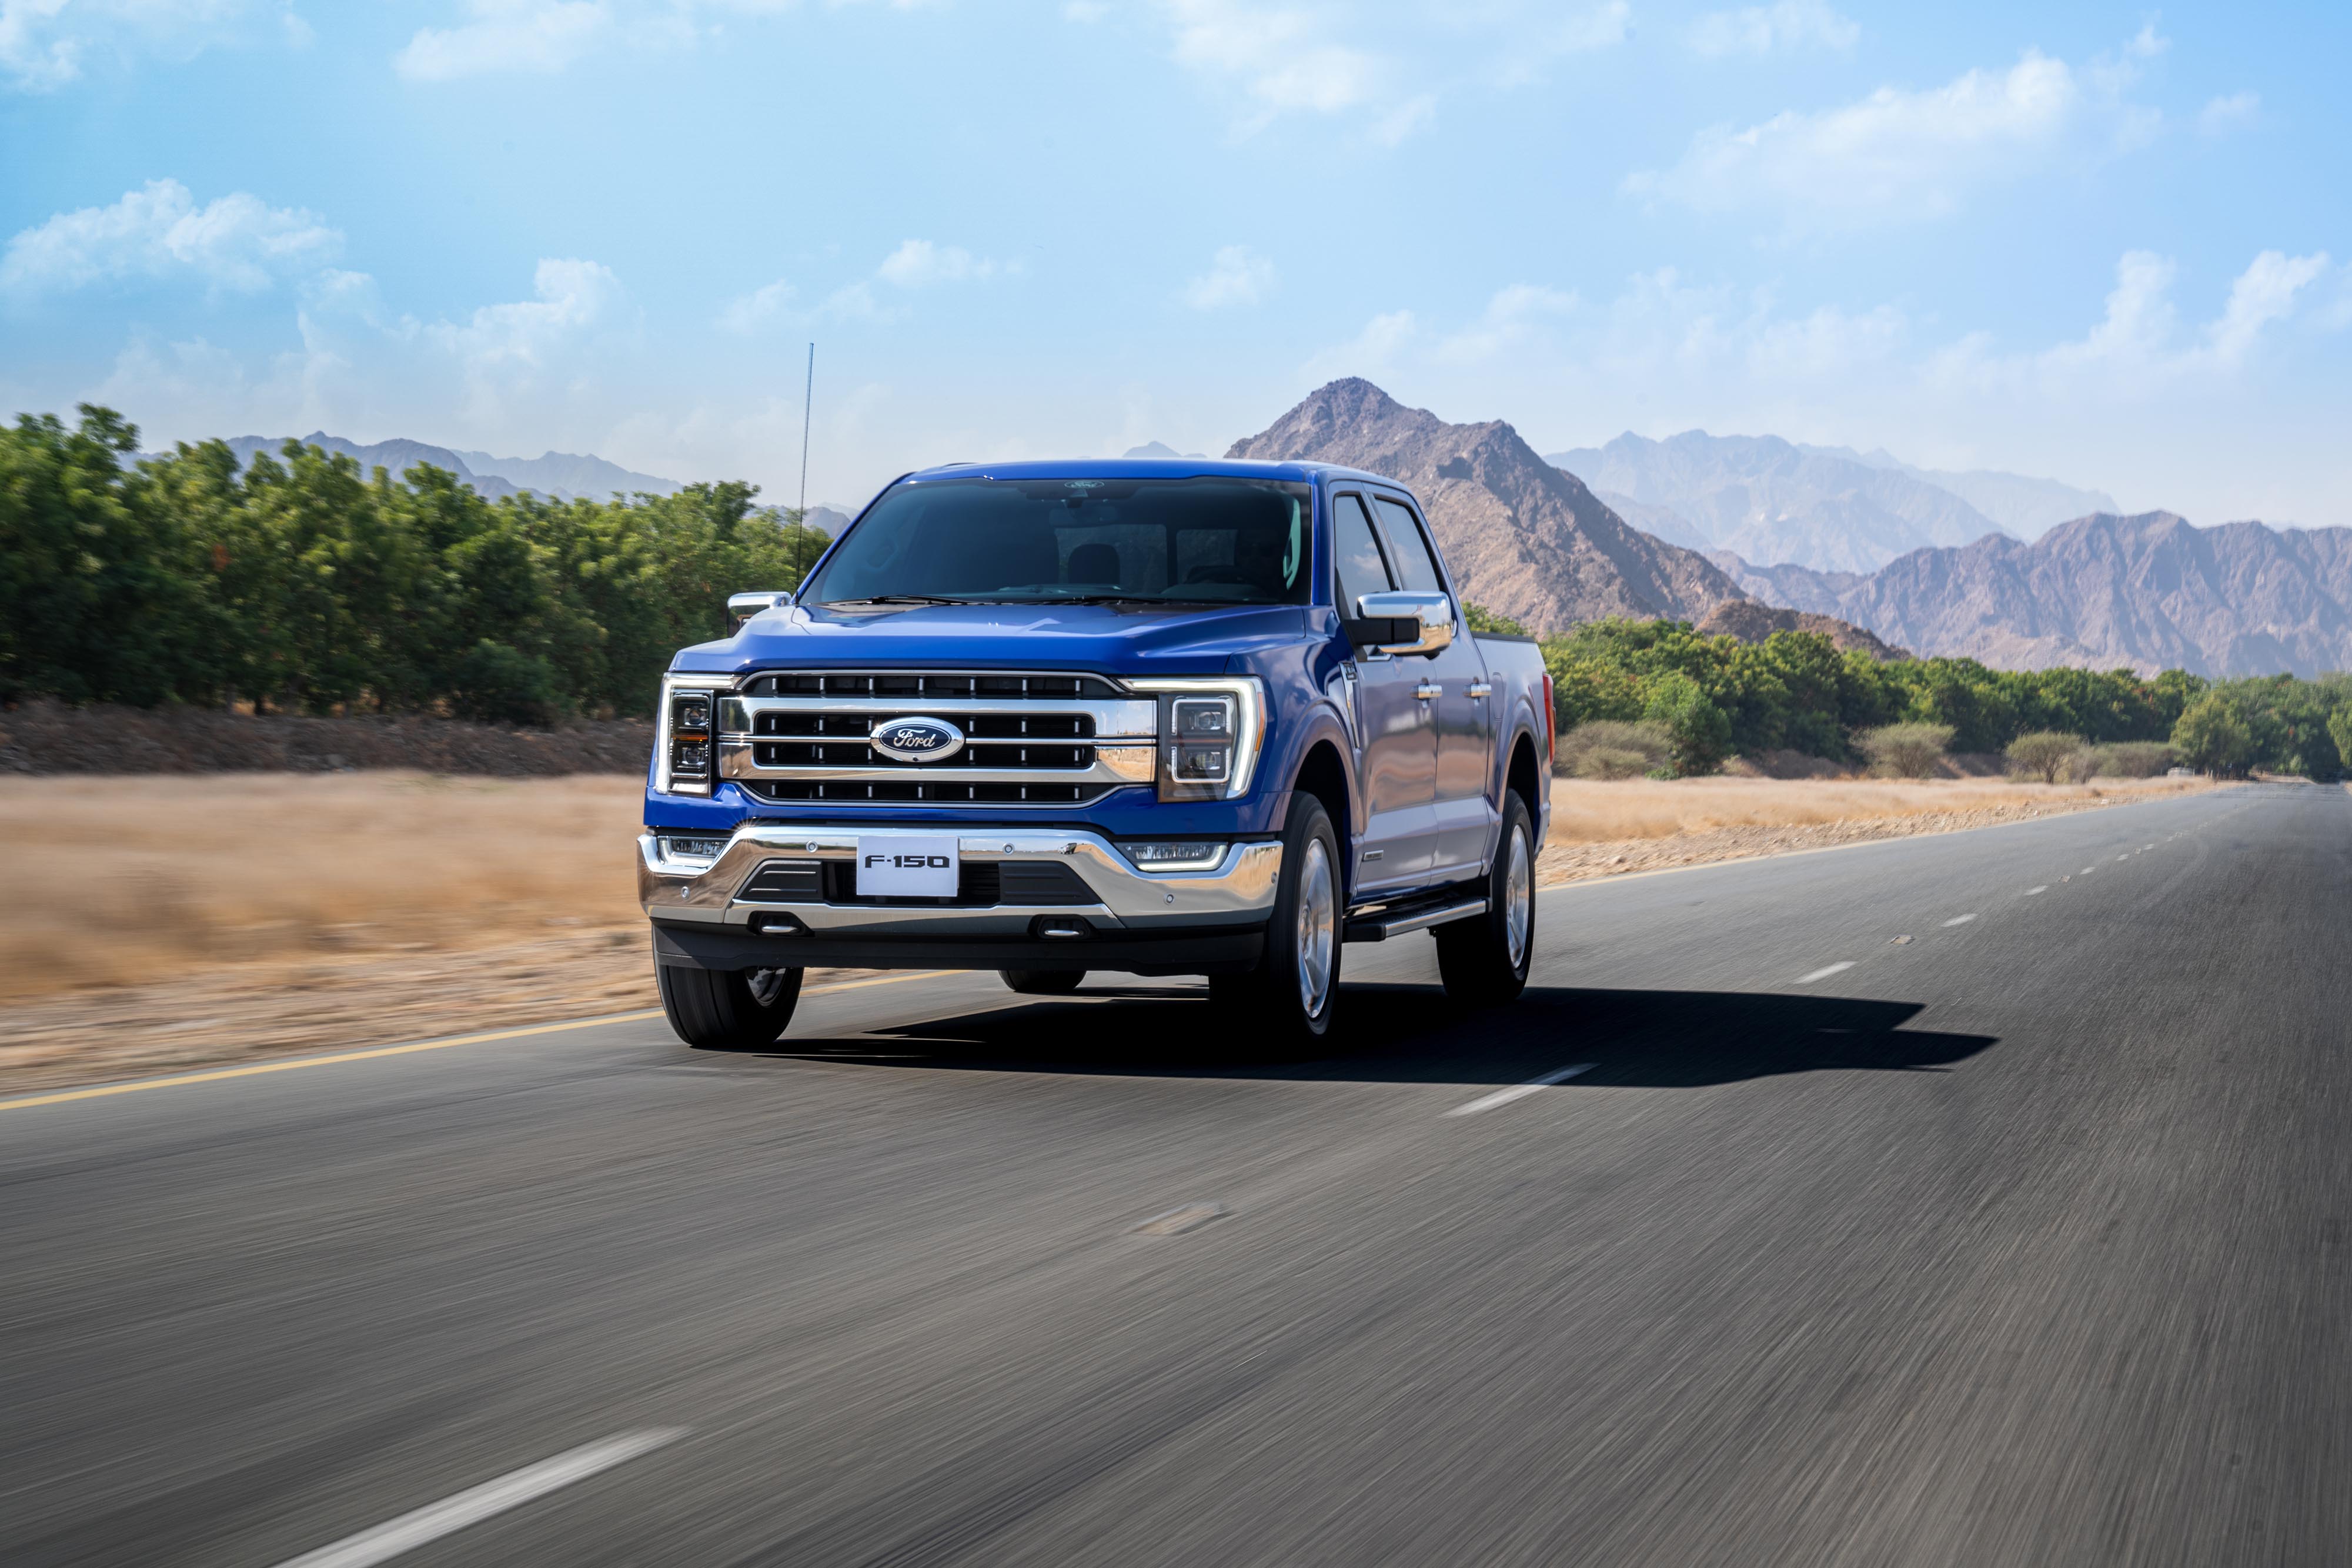 With Class-Leading Levels of Power, Capability and Technology, the 2021 F-150 Offers Owners Exceptional Performance and Value